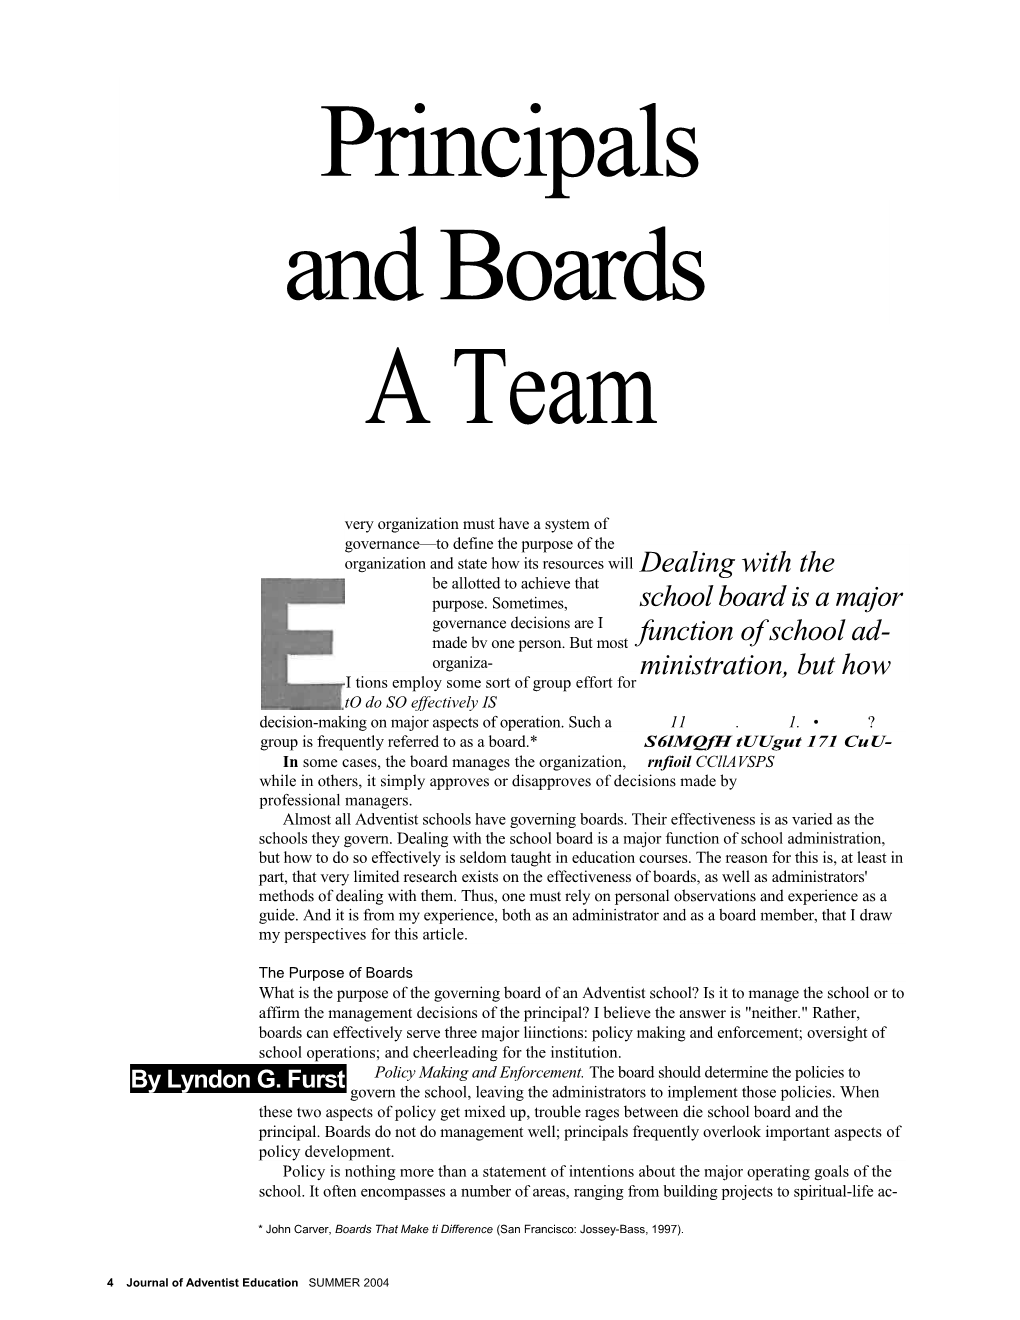 Dealing with the School Board Is a Major Function of School Administration, but How